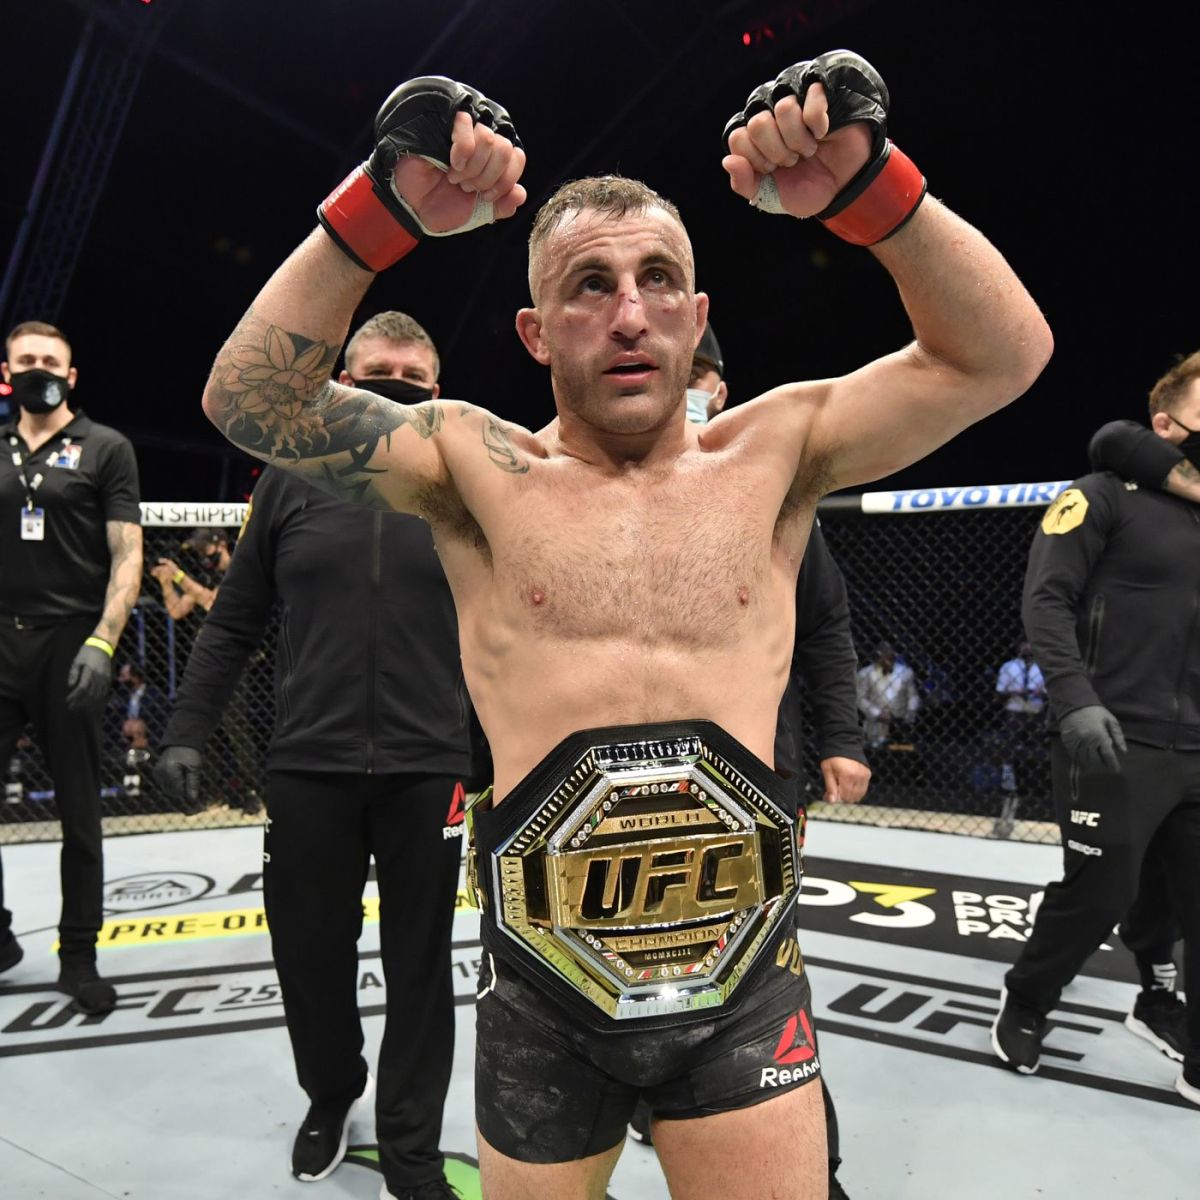 Volkanovski after his controversial split decision win against Max Holloway in their rematch.